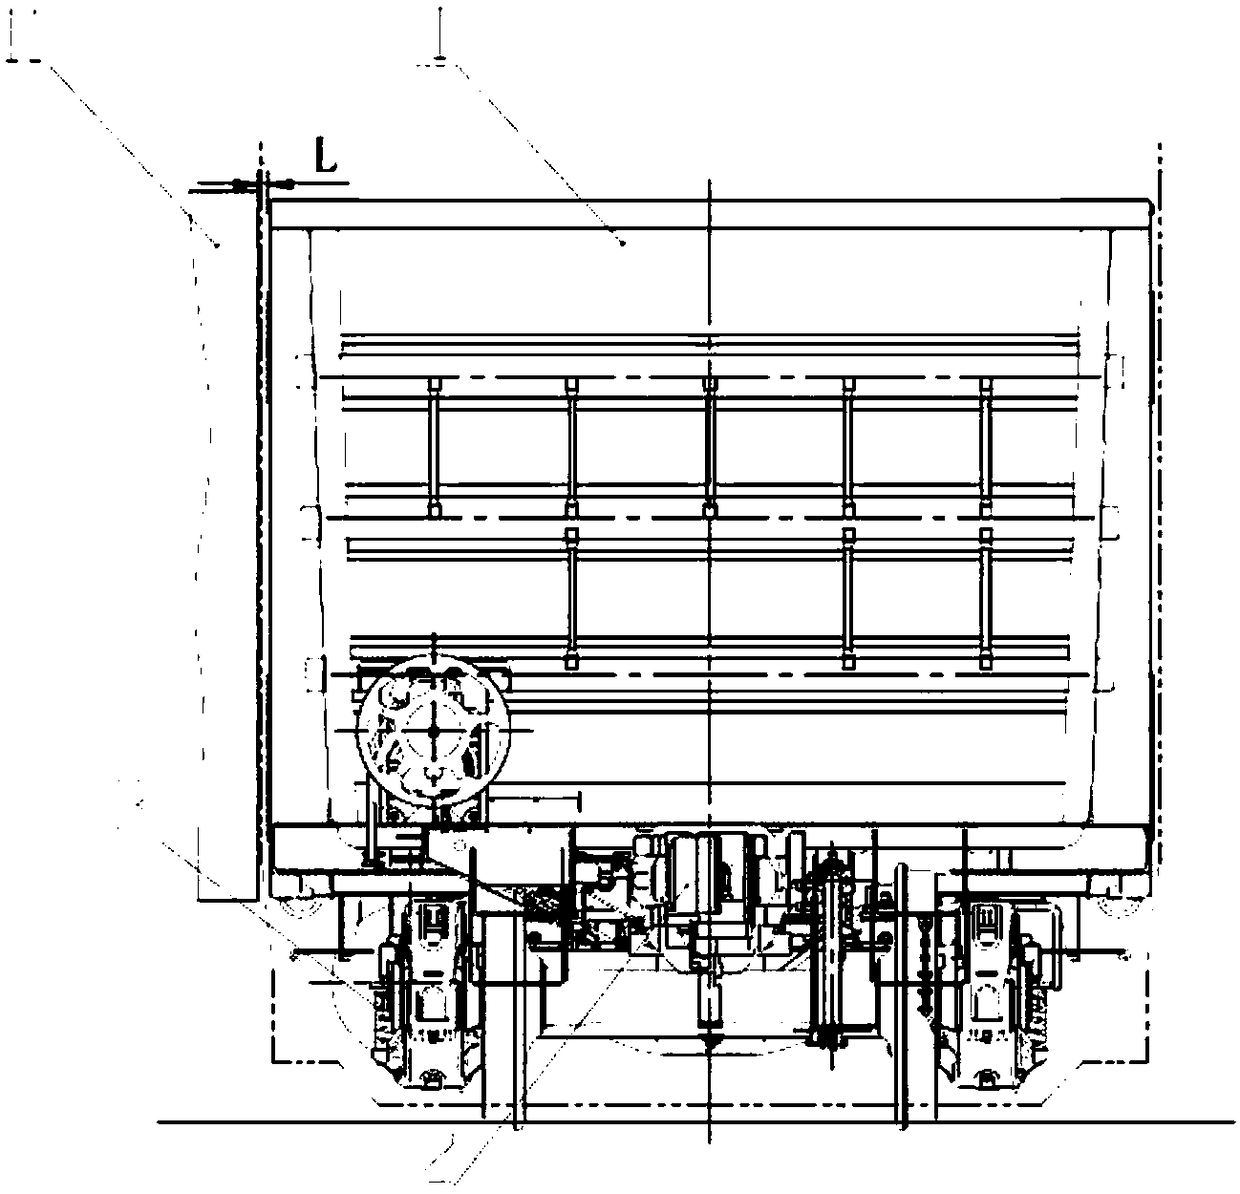 Open wagon suitable for high-frequent unloading of car dumper